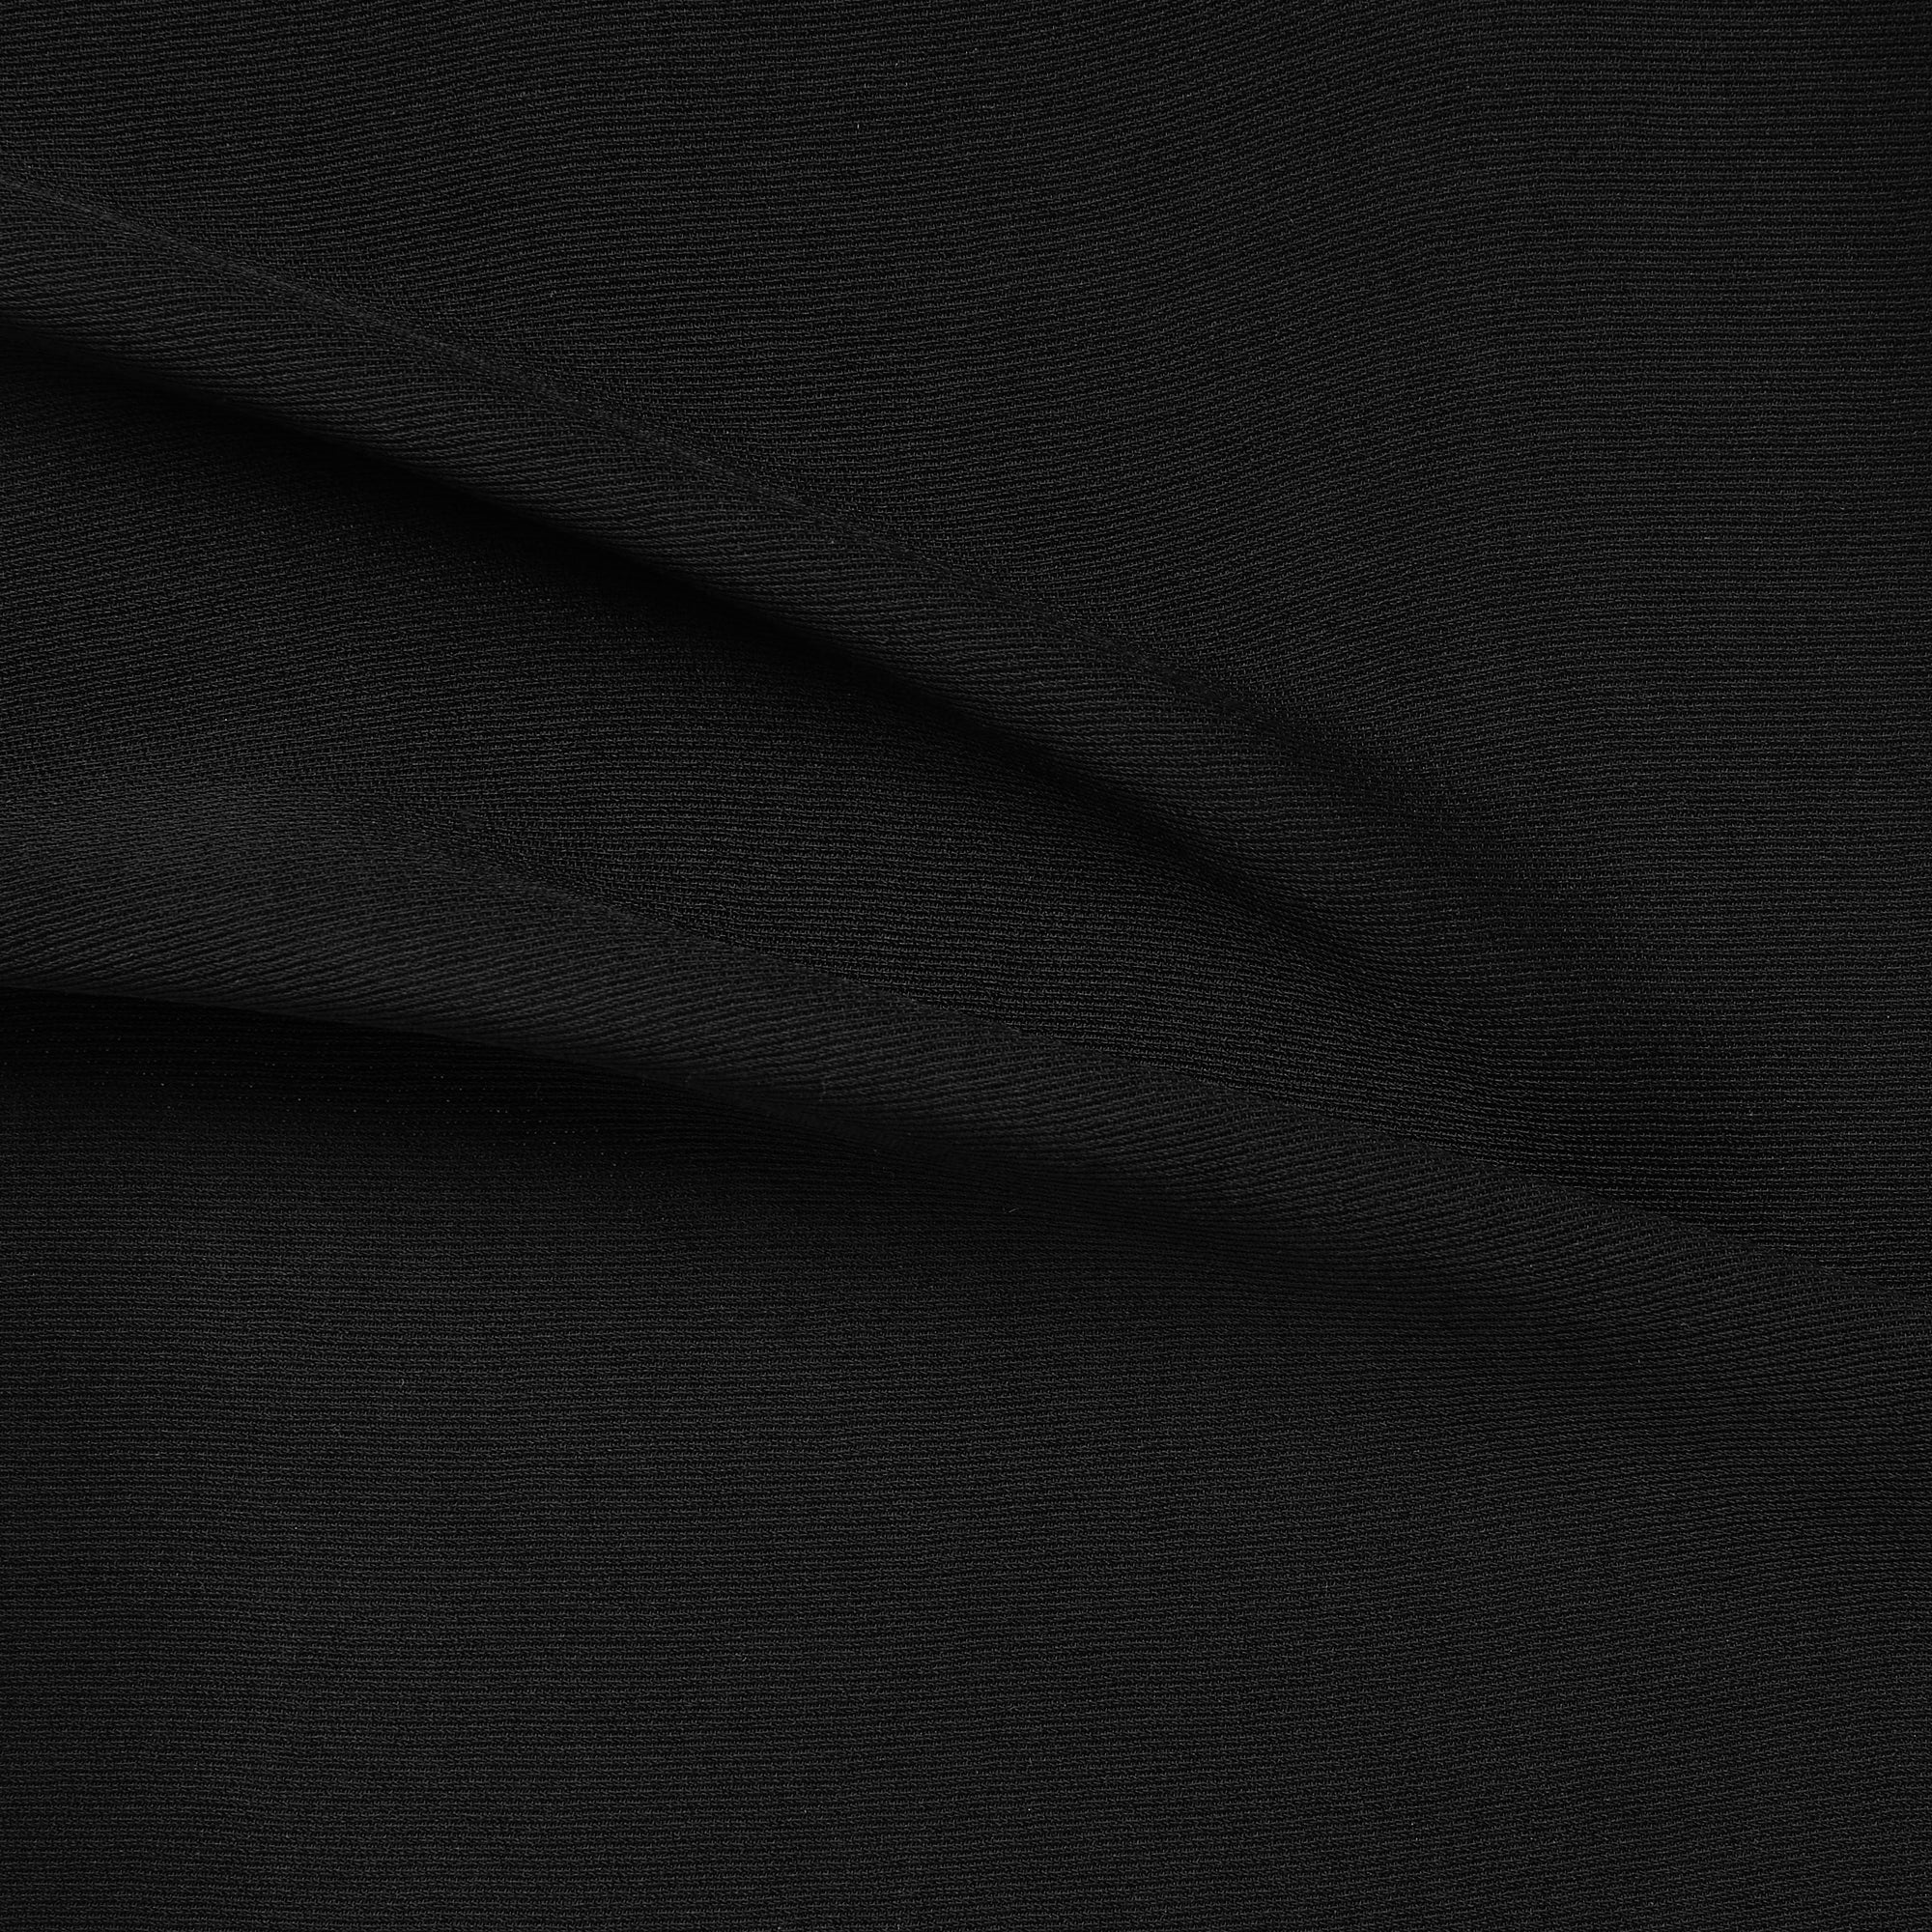 Dissplaying ultima a black color version of a polyester and acetate blend semi sheer mid weight textured fabric with fluid drape